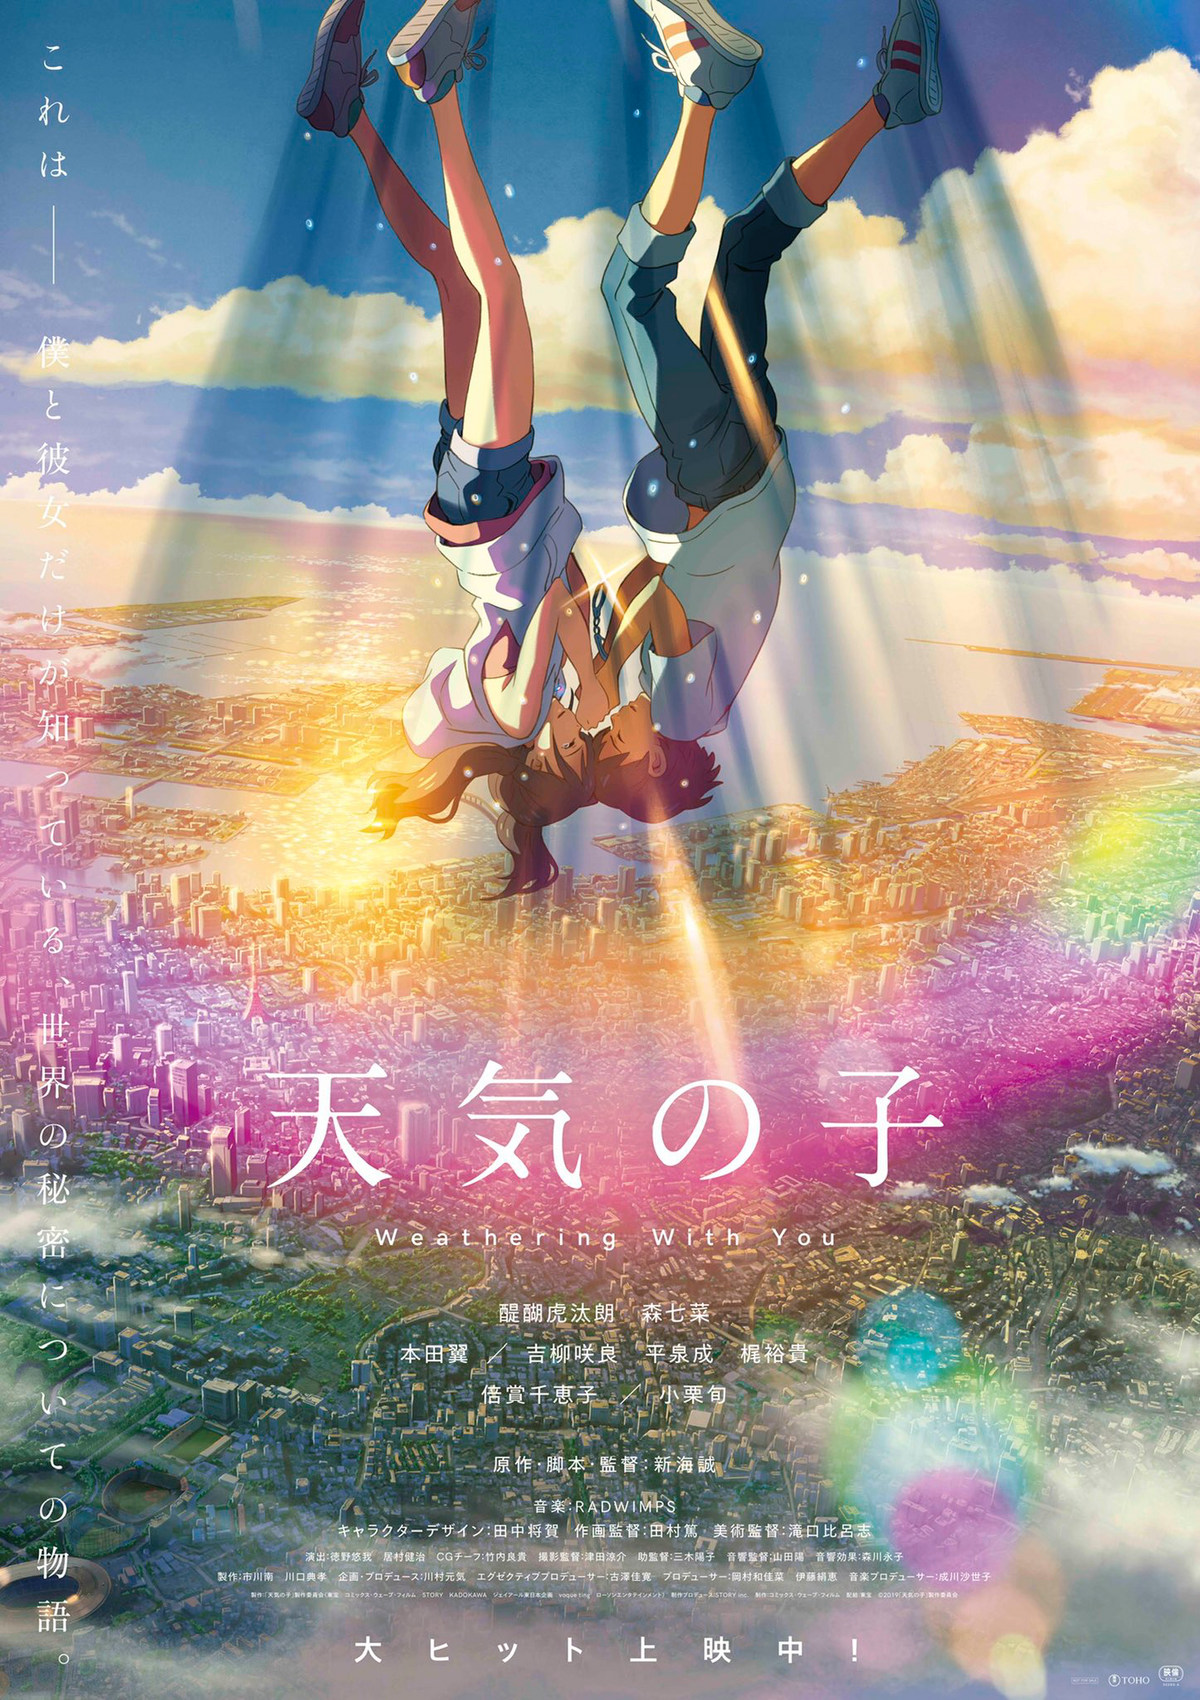 New US Trailer For The Highly Anticipated Anime Film WEATHERING WITH YOU   GeekTyrant